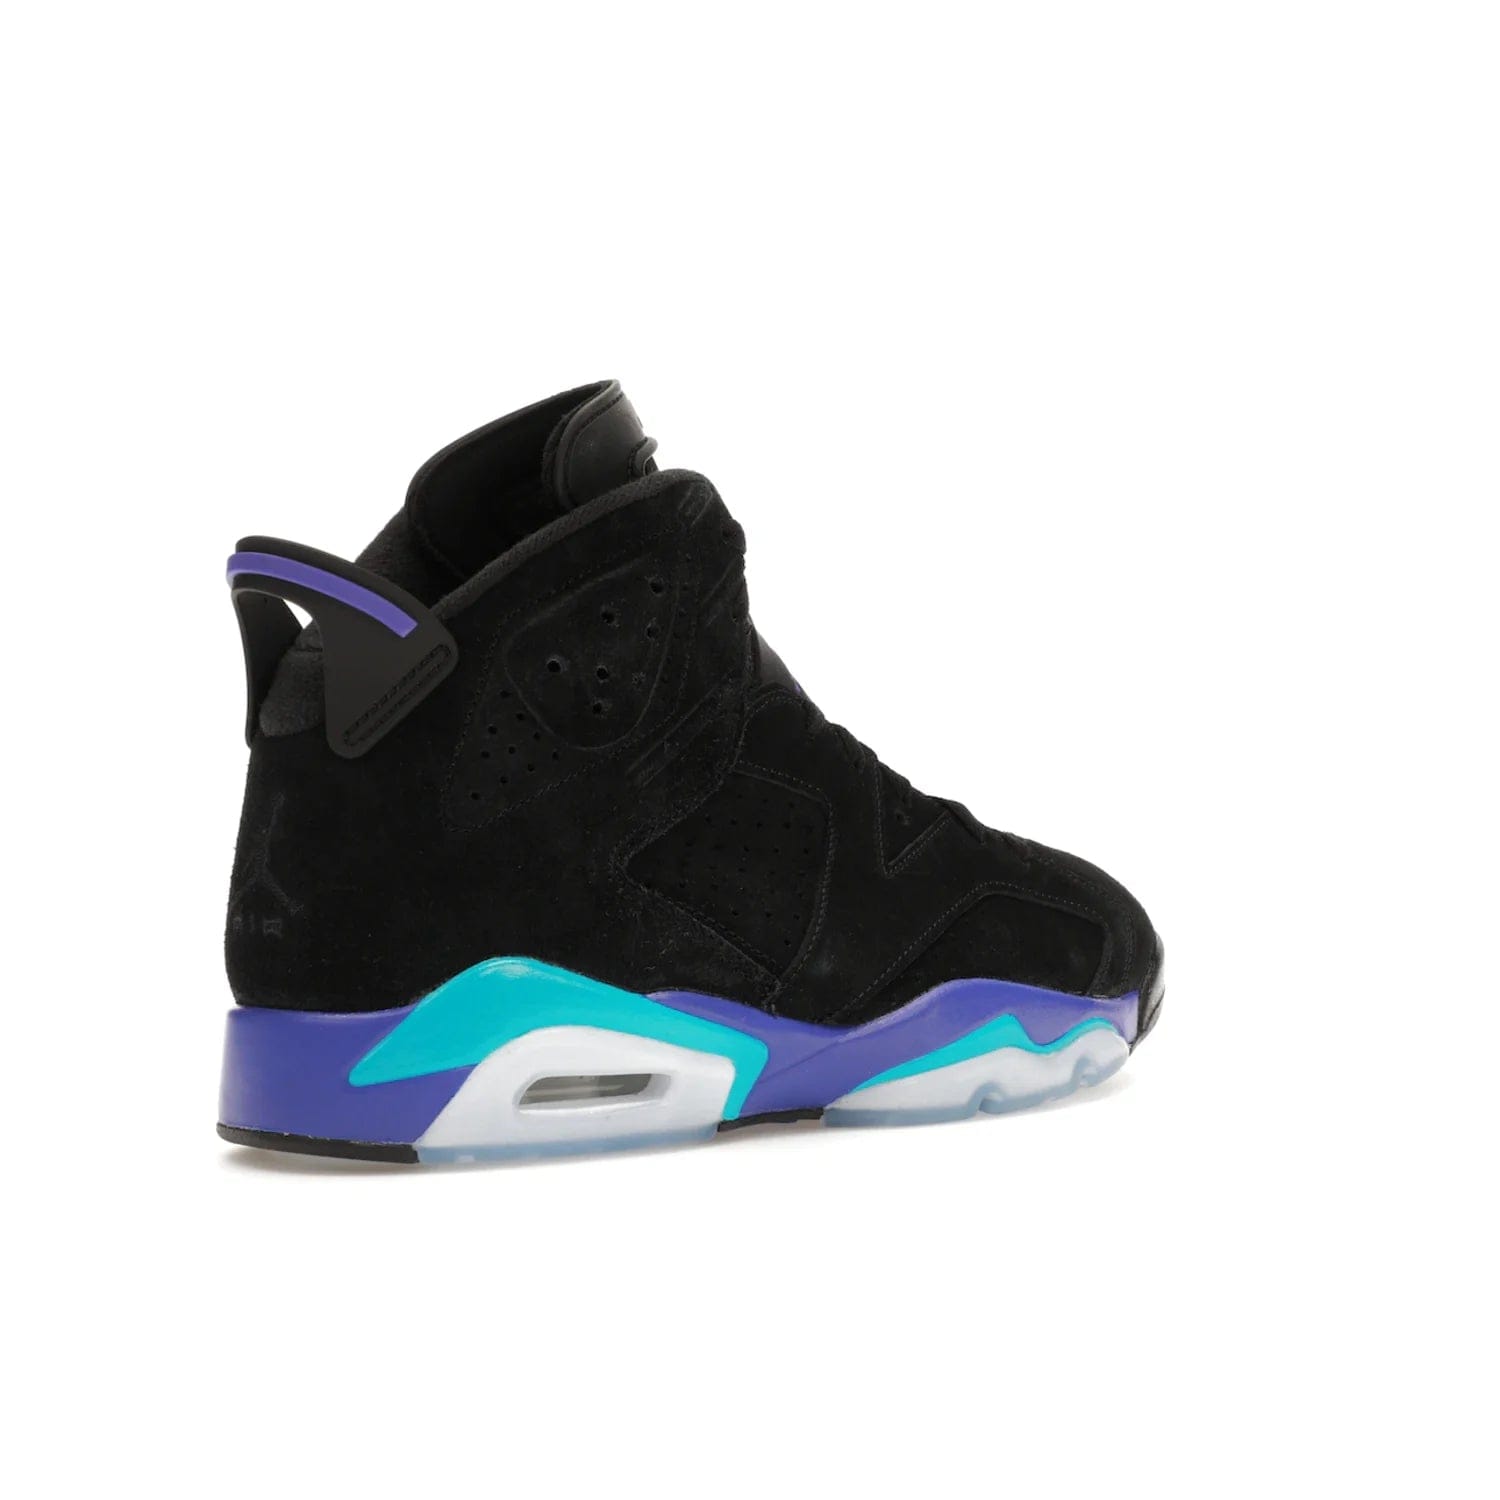 Jordan 6 Retro Aqua - Image 33 - Only at www.BallersClubKickz.com - Feel the classic Jordan 6 Retro Aqua paired with modern style. Black, Bright Concord, and Aquatone hues are crafted with a supple suede and rubberized heel tab. This standout sneaker adds signature Jordan elements at $200. Elevate your style with the Jordan 6 Retro Aqua.